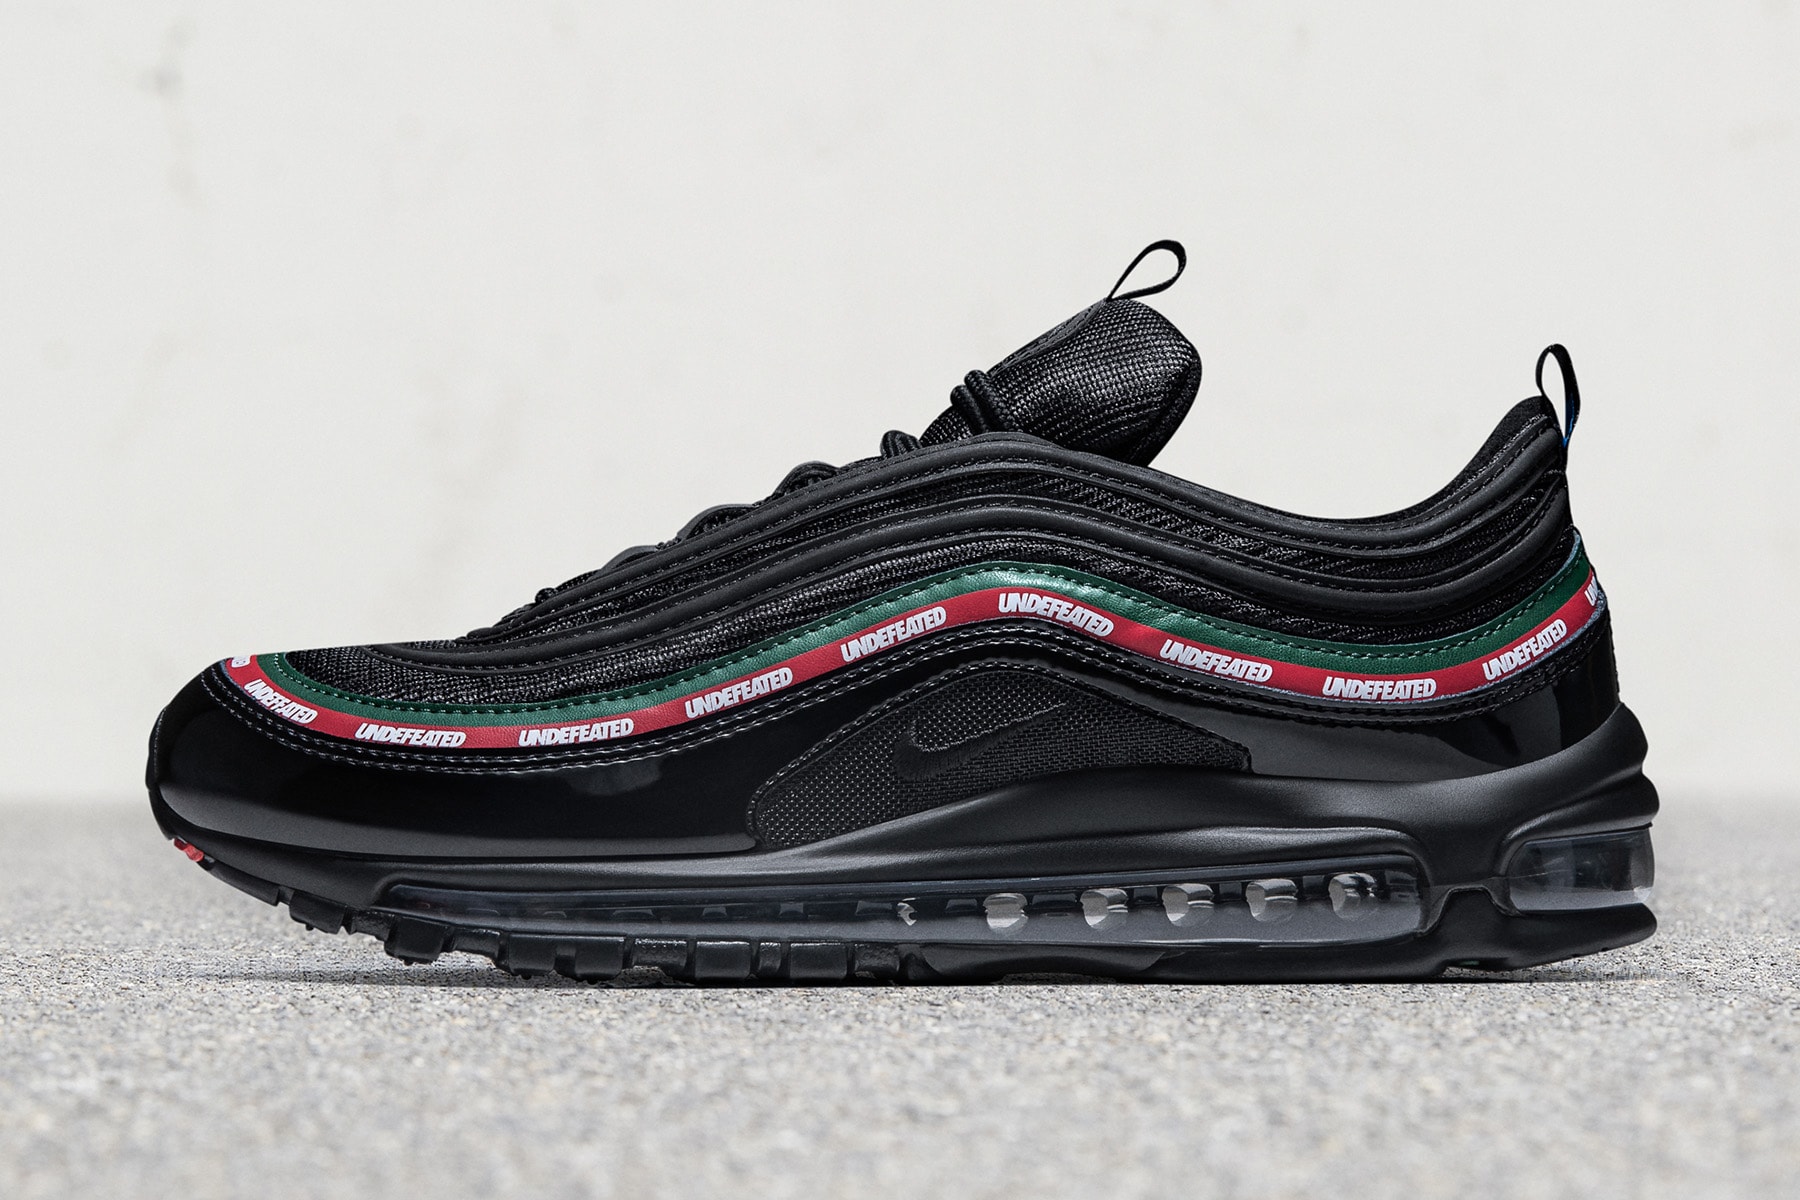 Nike x UNDEFEATED コラボ Air Max 97 の日本発売が遂に決定